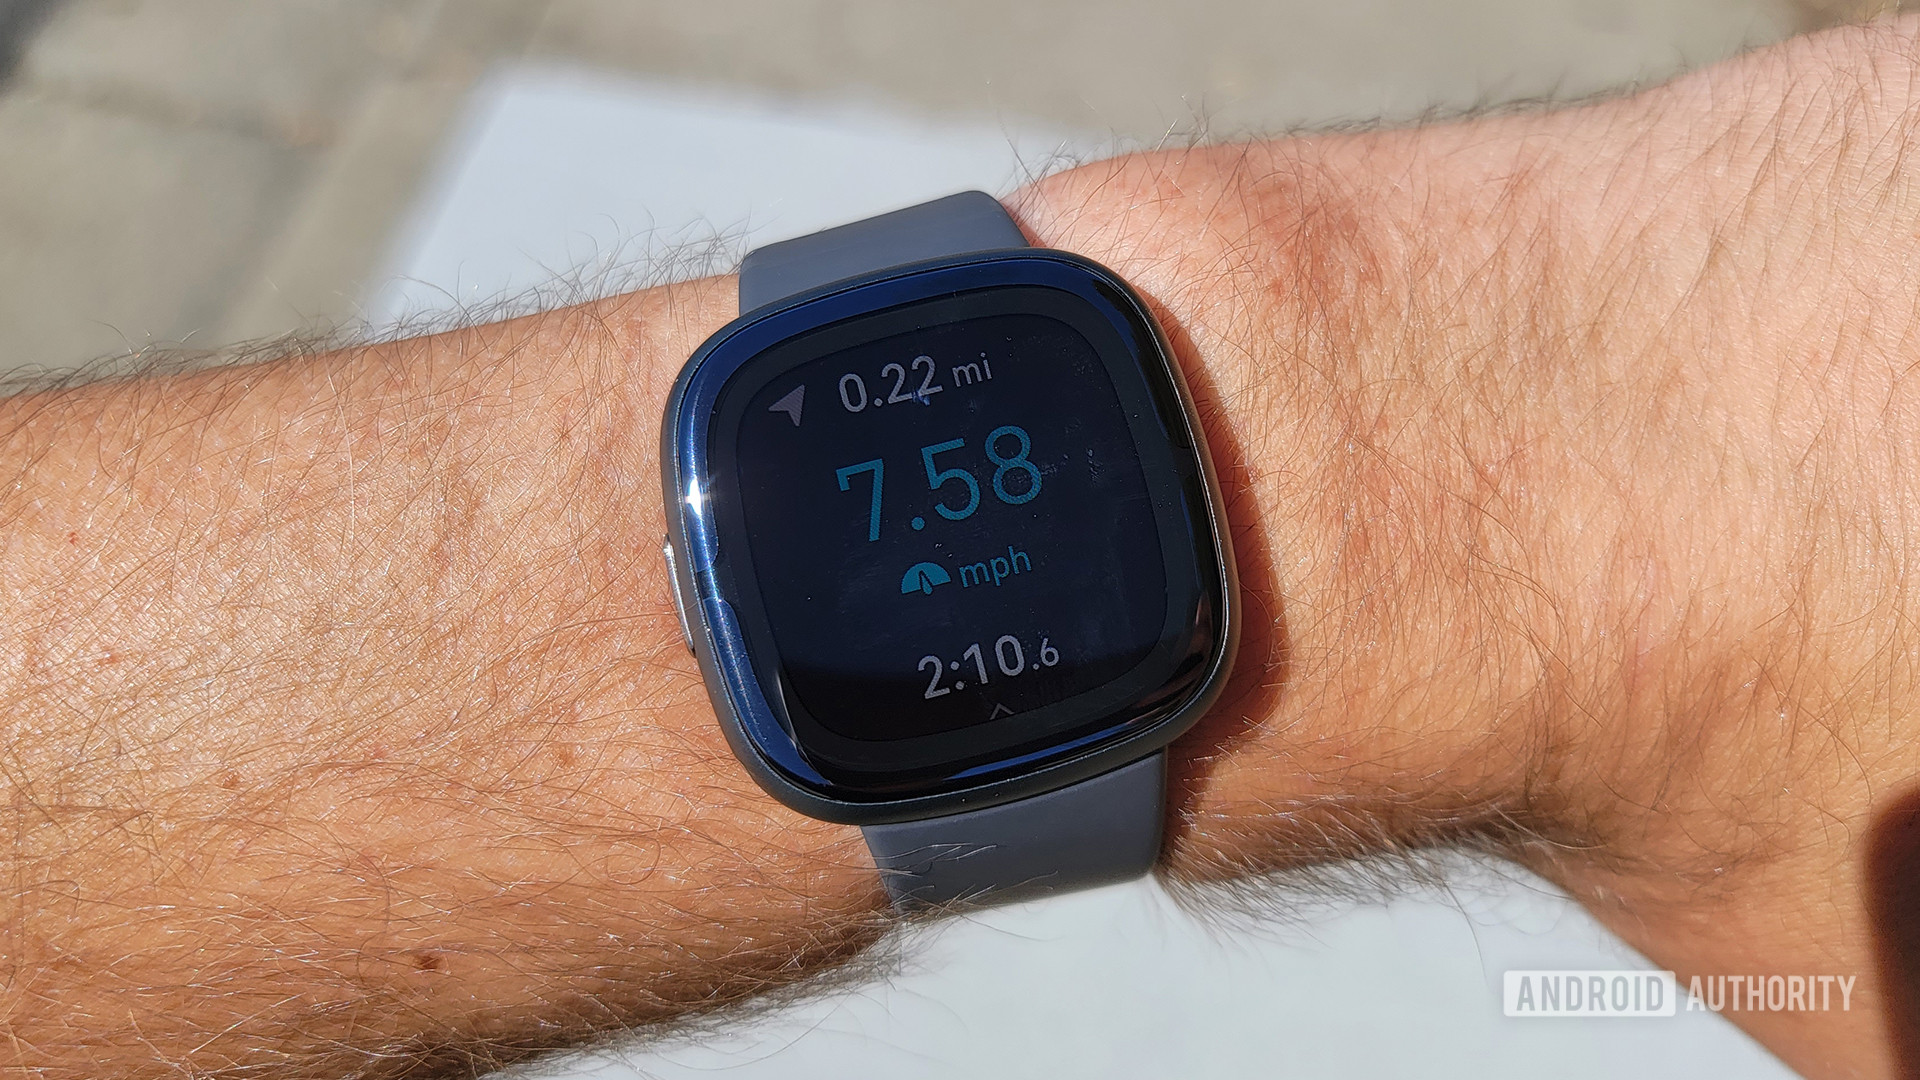 A user reviews their workout stats on wrist.